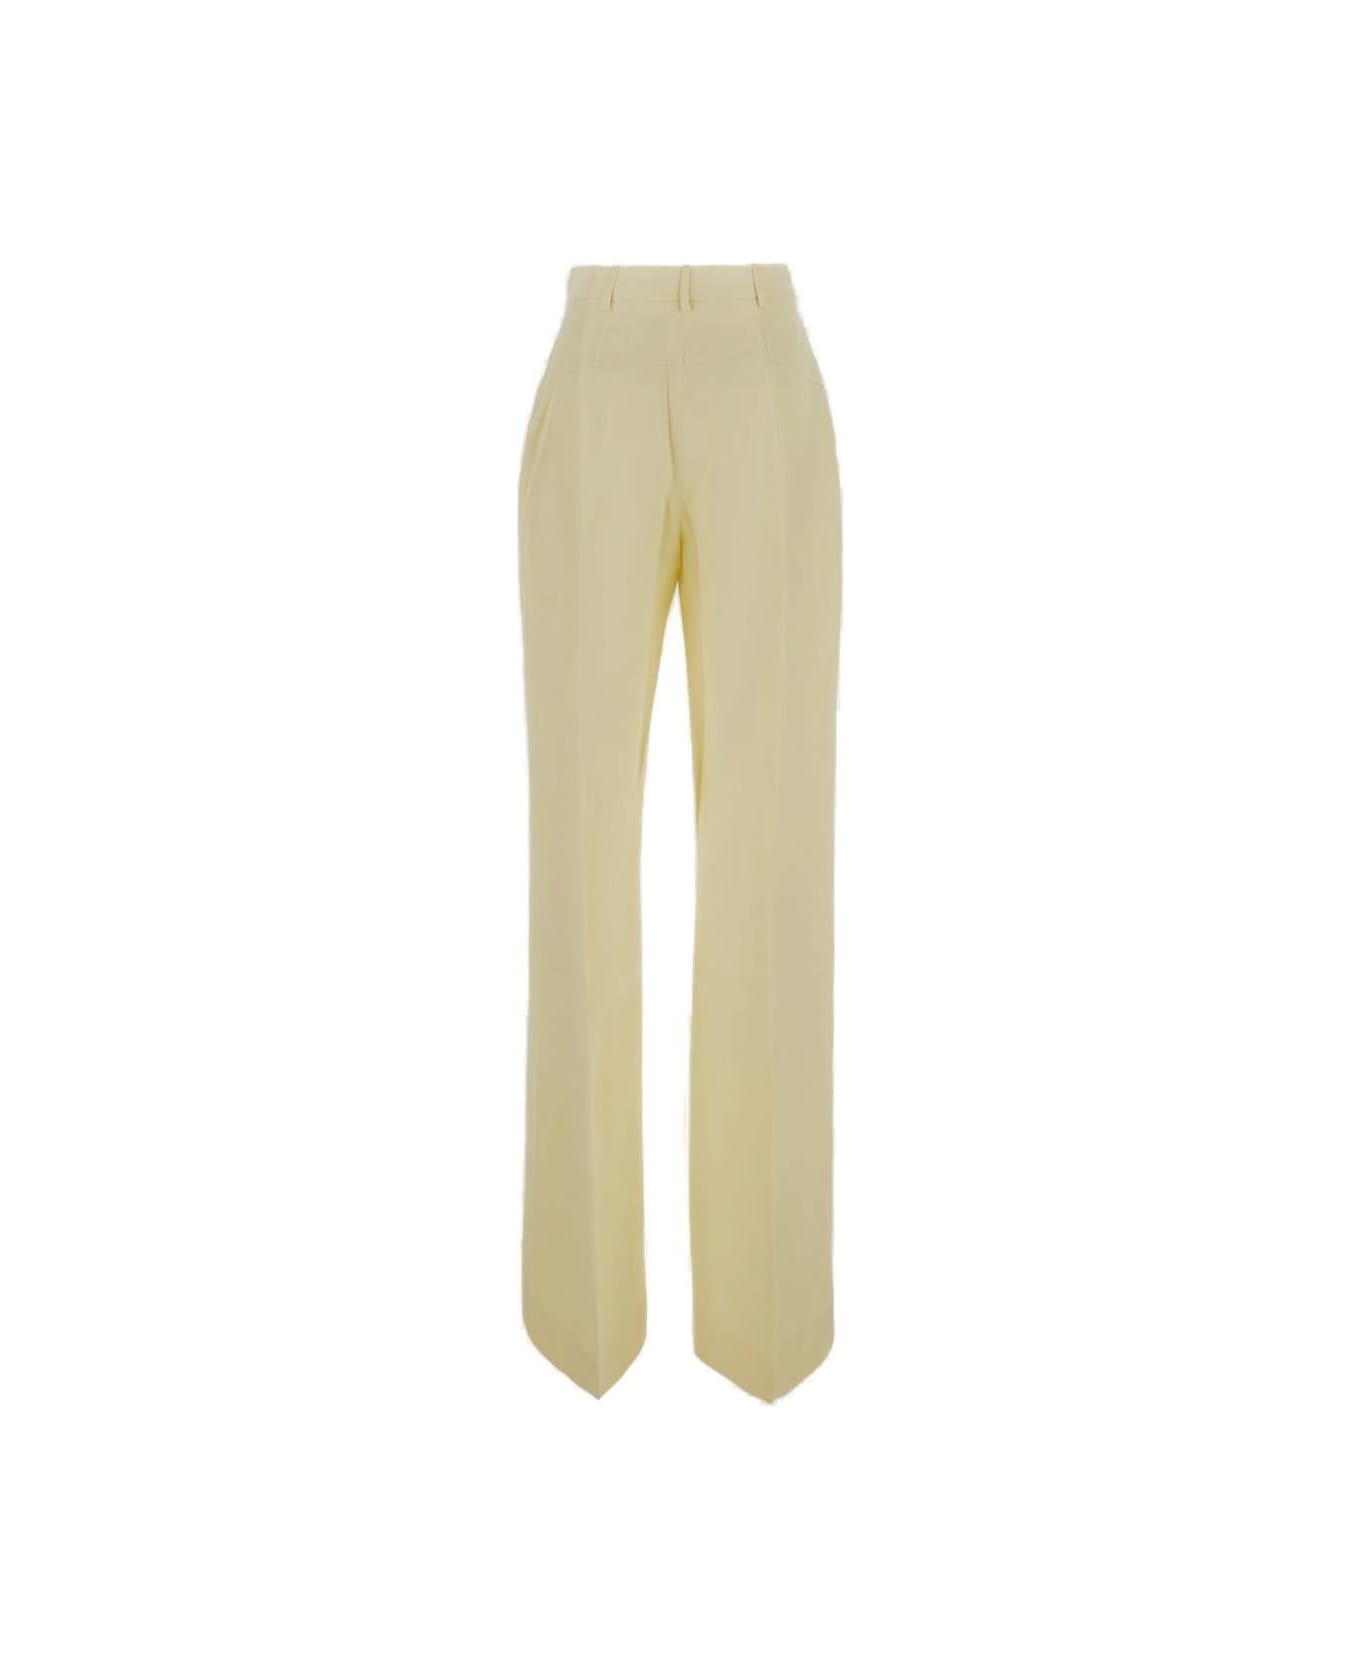 Jacquemus High Waist Flare Trousers - Pale Yellow ボトムス